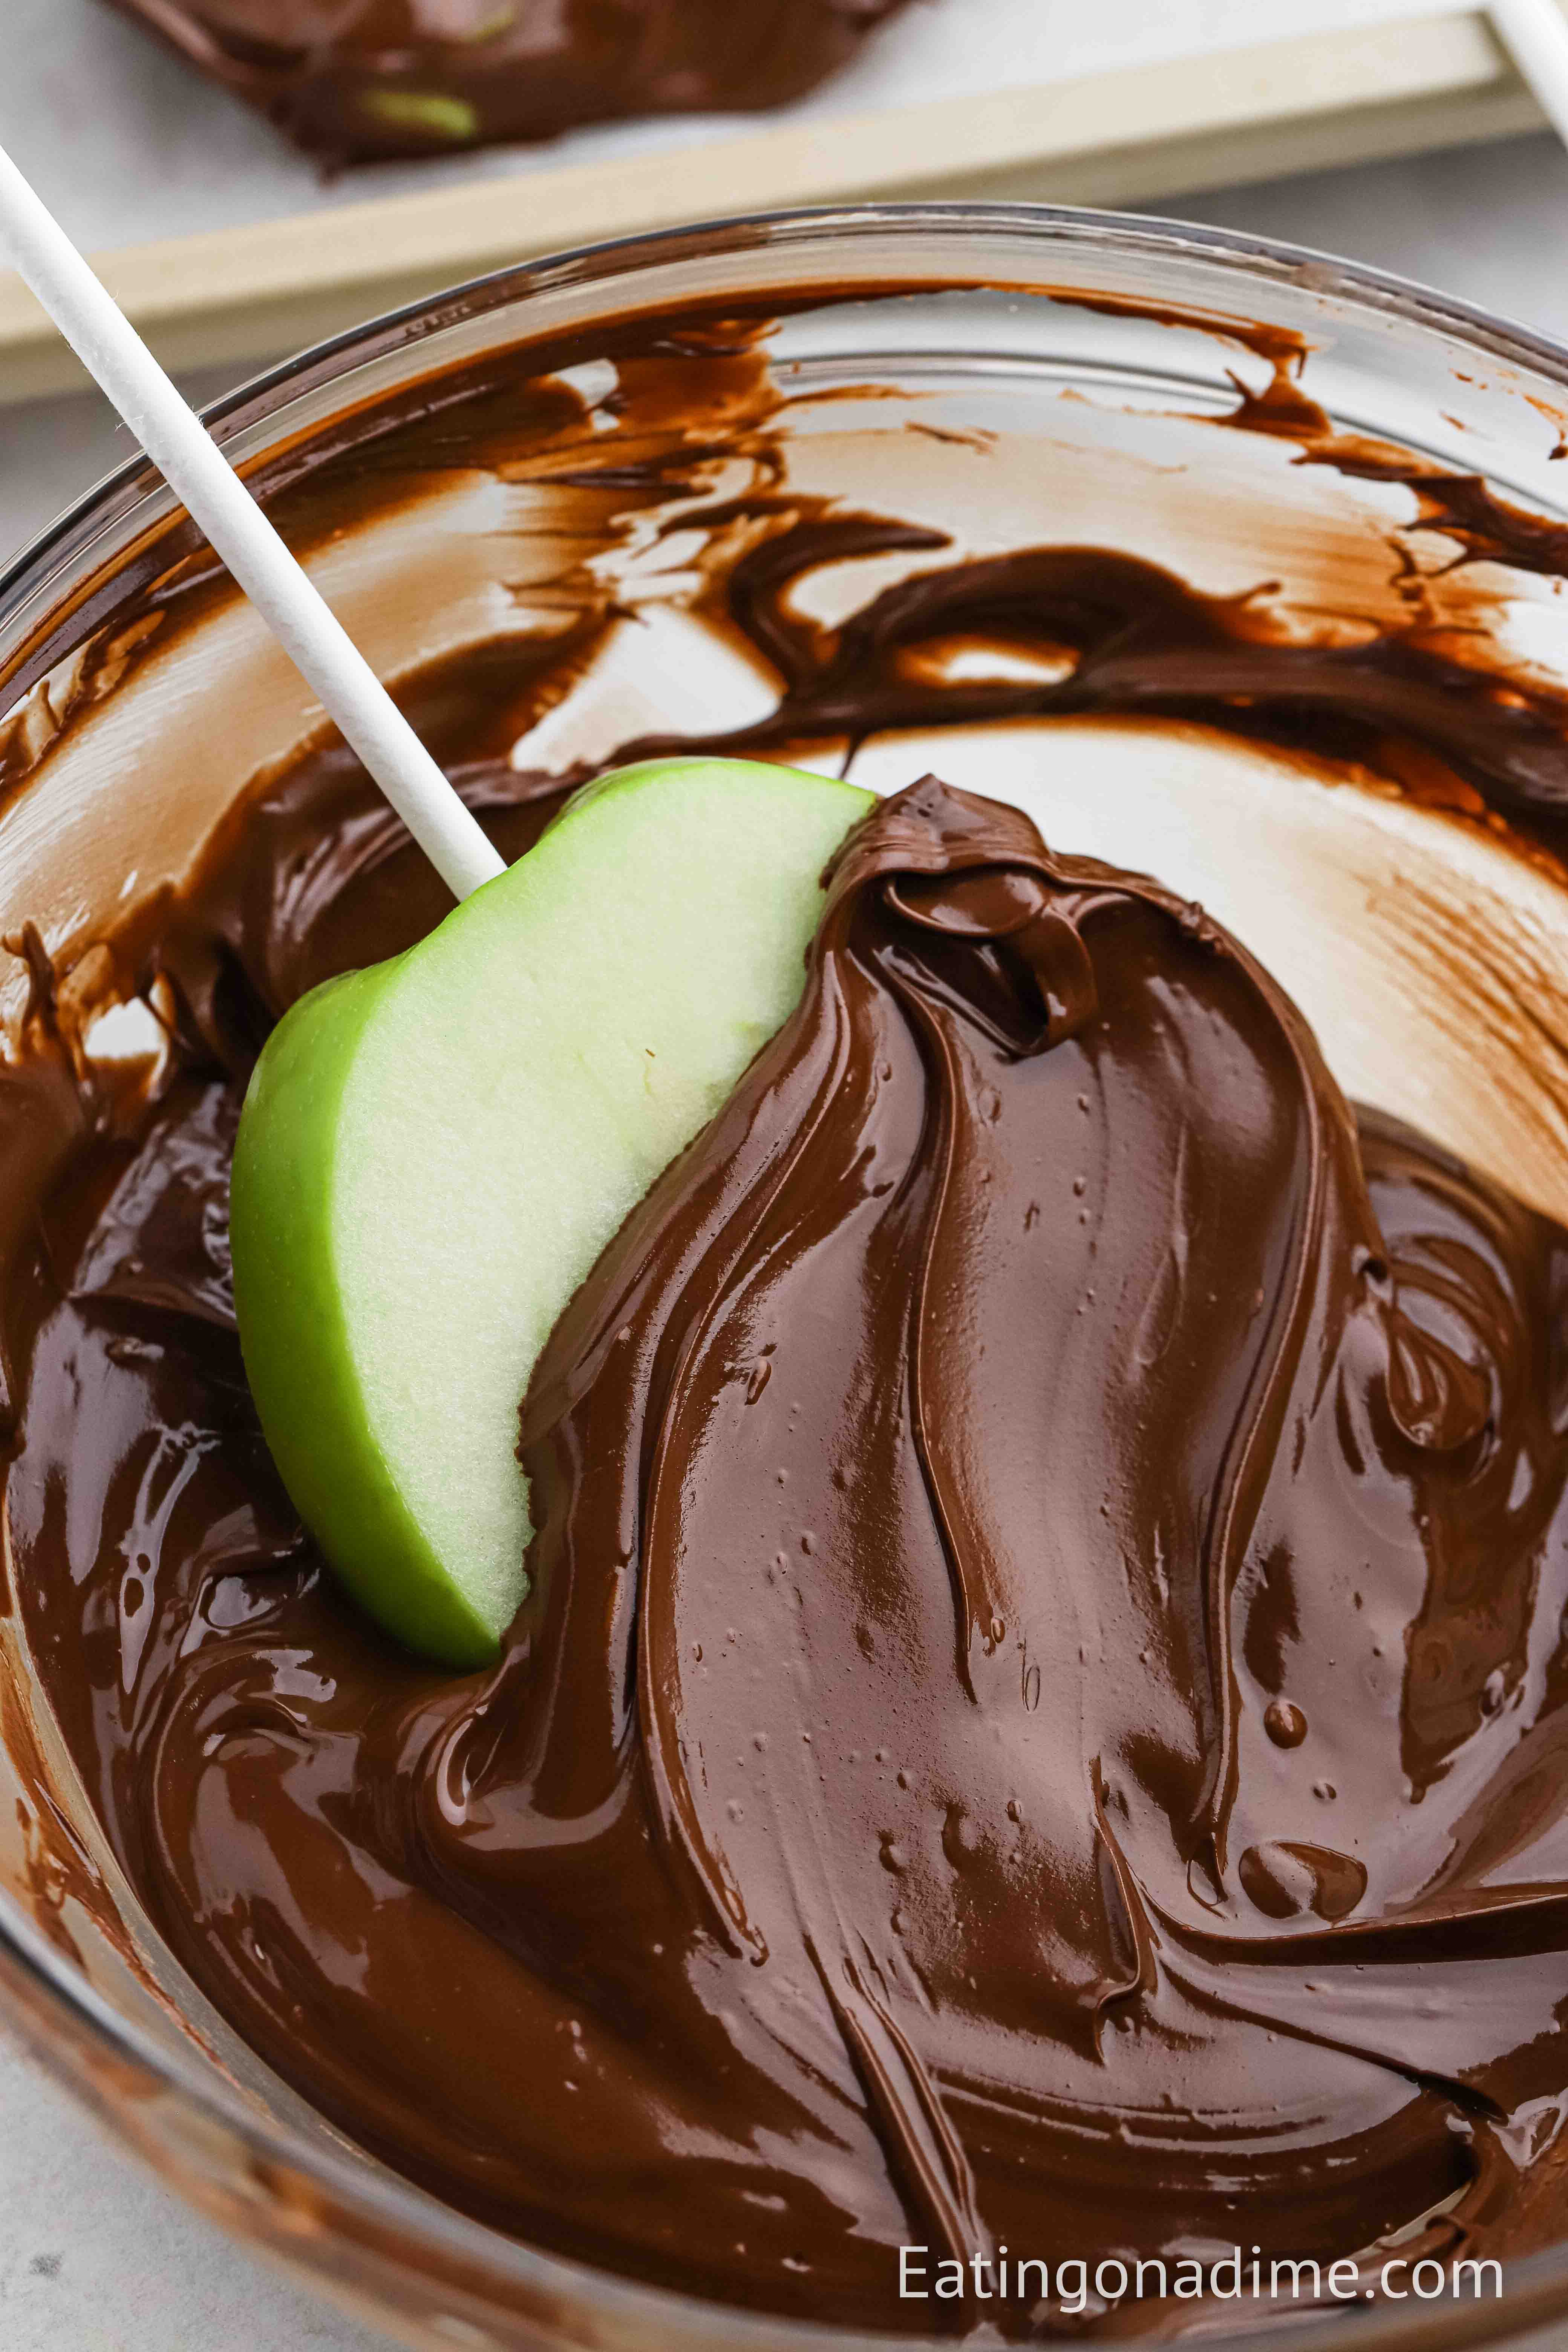 Dipping apple slices into melted chocolate